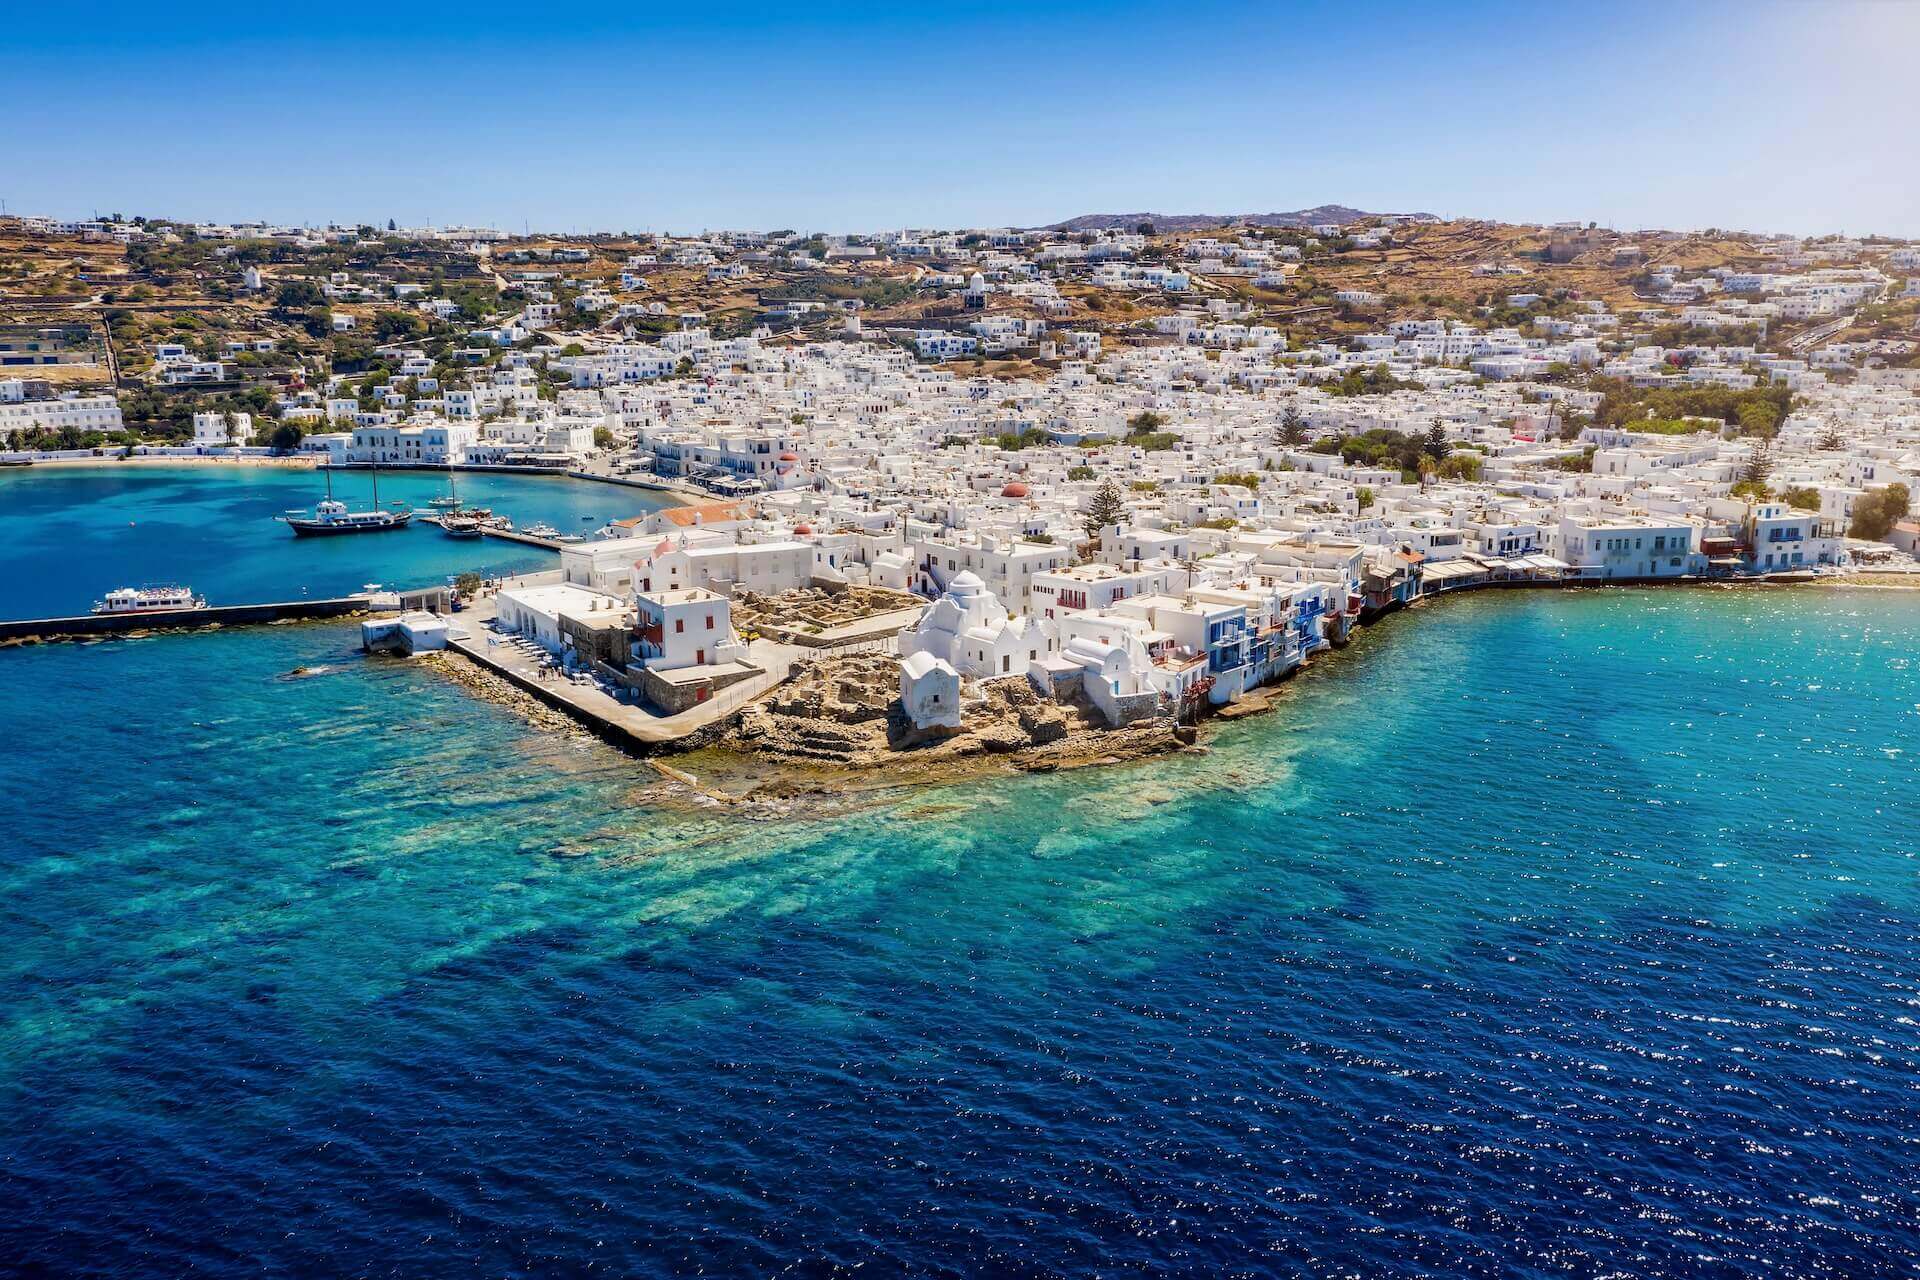 View of Mykonos town from the air from Rhenia